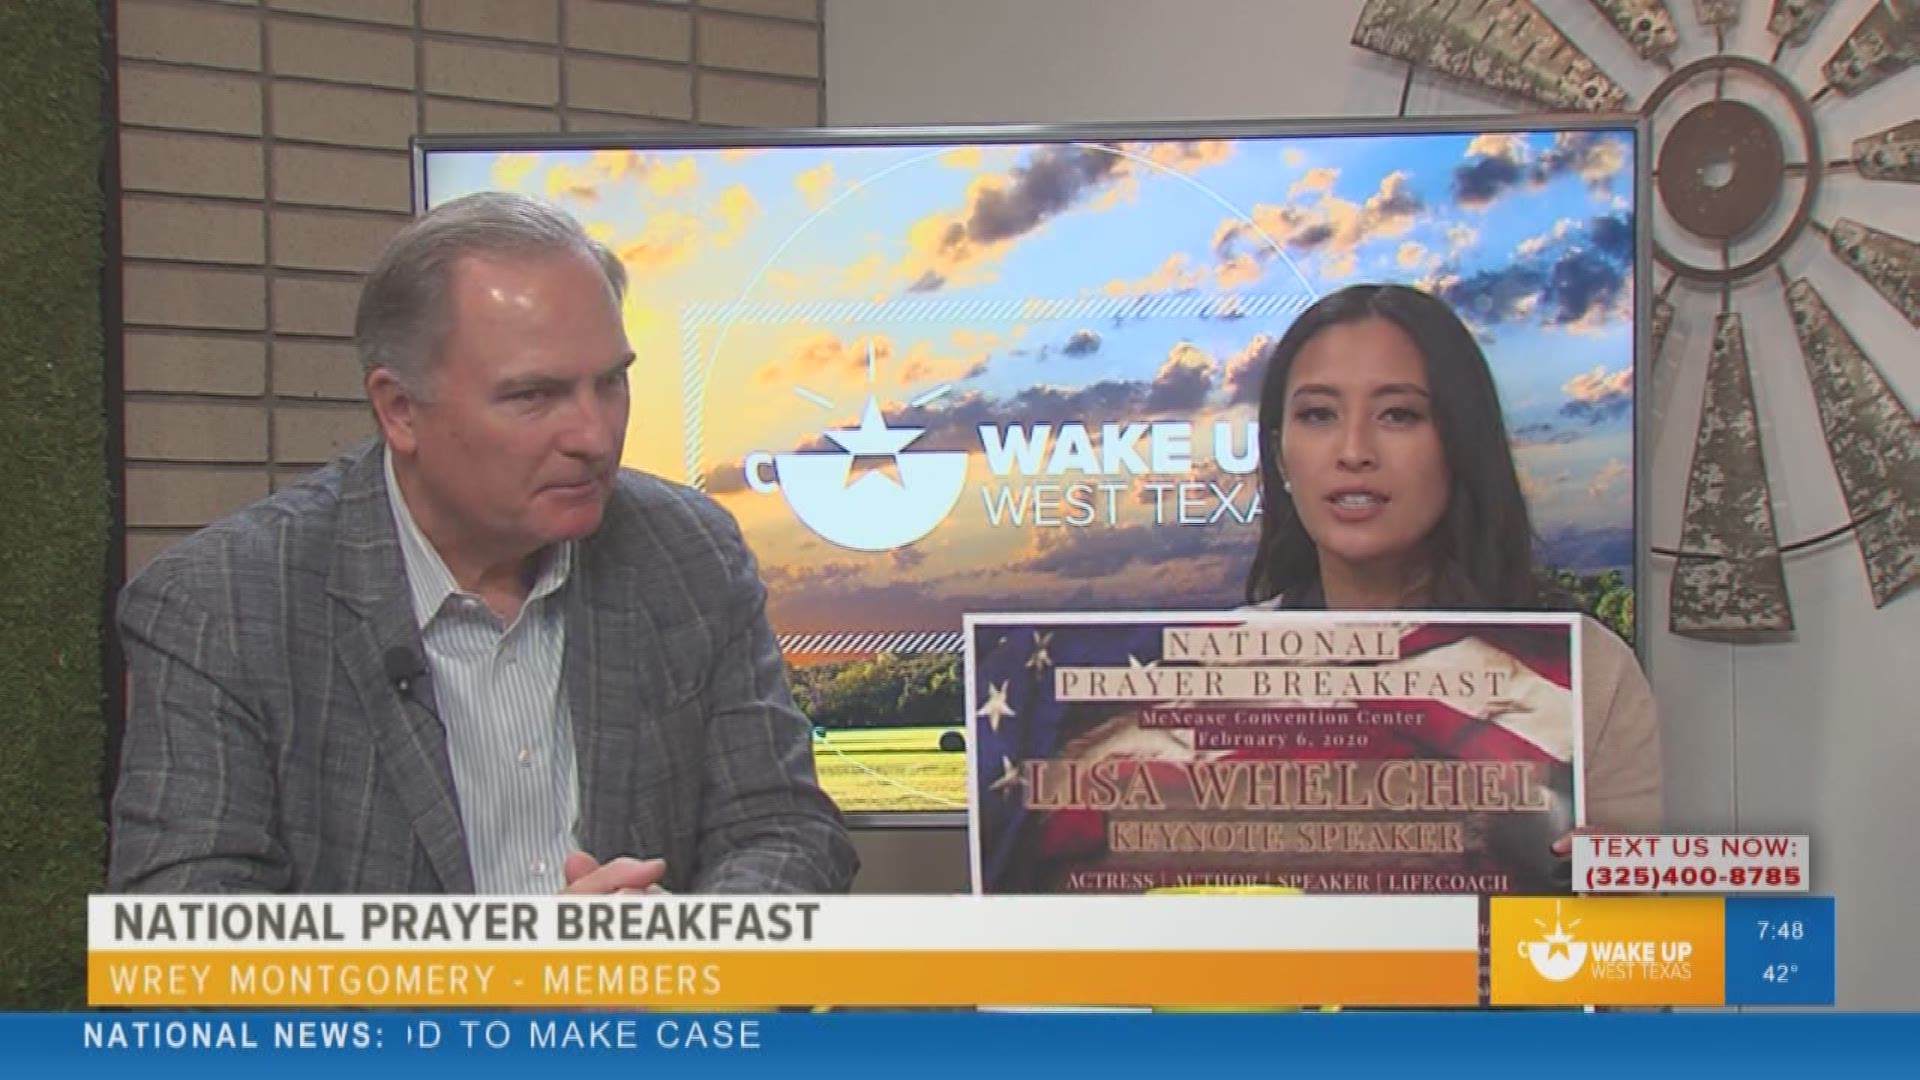 Our Camille Requiestas spoke to member Wrey Montgomery about the upcoming National Prayer Breakfast.